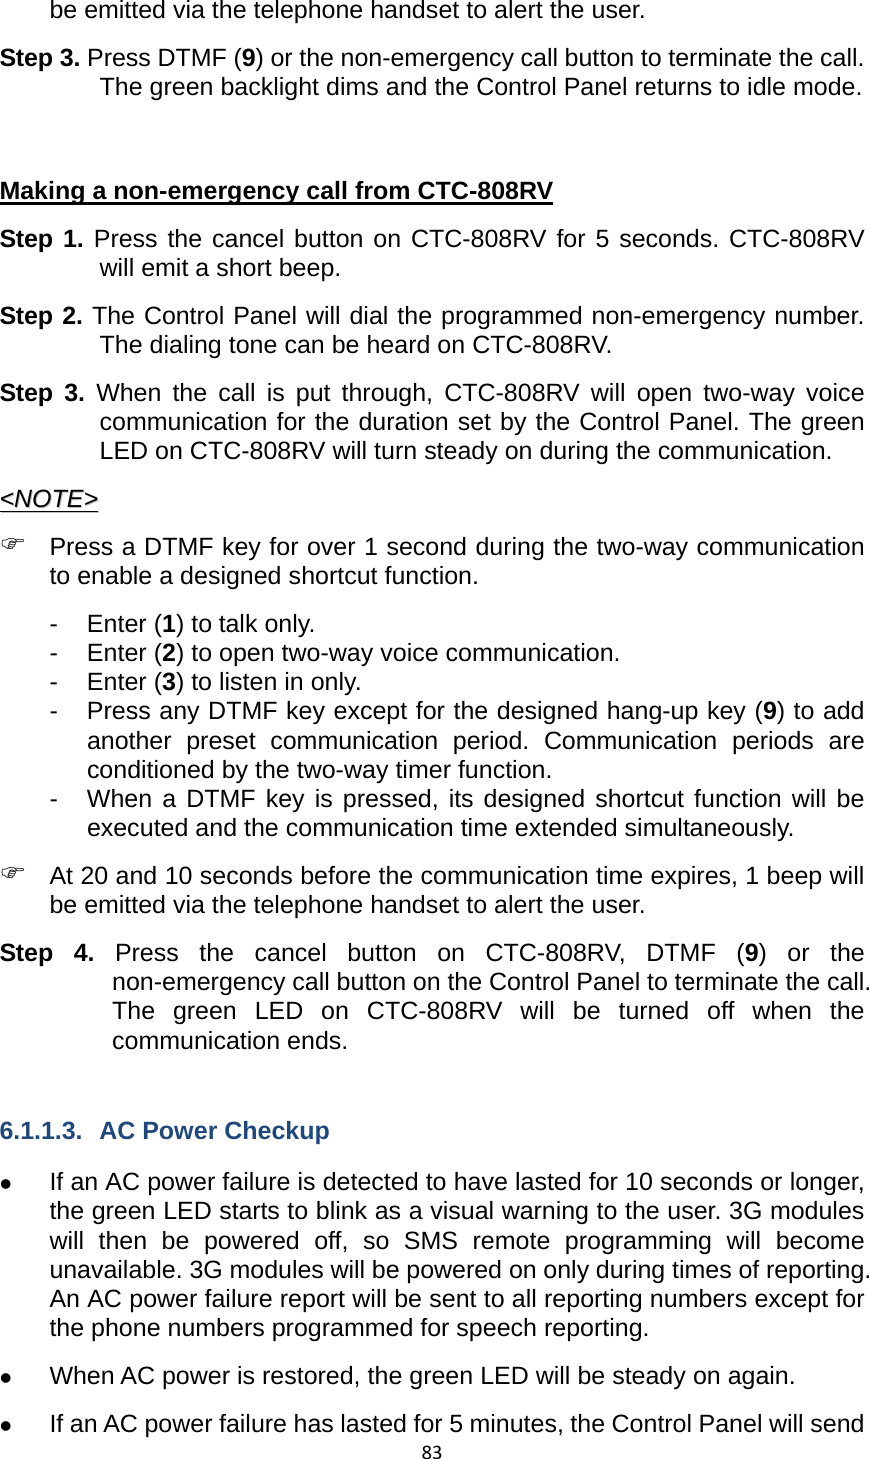 83be emitted via the telephone handset to alert the user.   Step 3. Press DTMF (9) or the non-emergency call button to terminate the call. The green backlight dims and the Control Panel returns to idle mode.    Making a non-emergency call from CTC-808RV Step 1. Press the cancel button on CTC-808RV for 5 seconds. CTC-808RV will emit a short beep.   Step 2. The Control Panel will dial the programmed non-emergency number. The dialing tone can be heard on CTC-808RV.   Step 3. When the call is put through, CTC-808RV will open two-way voice communication for the duration set by the Control Panel. The green LED on CTC-808RV will turn steady on during the communication.   &lt;&lt;NNOOTTEE&gt;&gt;  ) Press a DTMF key for over 1 second during the two-way communication to enable a designed shortcut function.   - Enter (1) to talk only. - Enter (2) to open two-way voice communication. - Enter (3) to listen in only. -  Press any DTMF key except for the designed hang-up key (9) to add another preset communication period. Communication periods are conditioned by the two-way timer function.   -  When a DTMF key is pressed, its designed shortcut function will be executed and the communication time extended simultaneously.   ) At 20 and 10 seconds before the communication time expires, 1 beep will be emitted via the telephone handset to alert the user.   Step 4. Press the cancel button on CTC-808RV, DTMF (9) or the non-emergency call button on the Control Panel to terminate the call. The green LED on CTC-808RV will be turned off when the communication ends.    6.1.1.3. AC Power Checkup z If an AC power failure is detected to have lasted for 10 seconds or longer, the green LED starts to blink as a visual warning to the user. 3G modules will then be powered off, so SMS remote programming will become unavailable. 3G modules will be powered on only during times of reporting. An AC power failure report will be sent to all reporting numbers except for the phone numbers programmed for speech reporting.   z When AC power is restored, the green LED will be steady on again. z If an AC power failure has lasted for 5 minutes, the Control Panel will send 